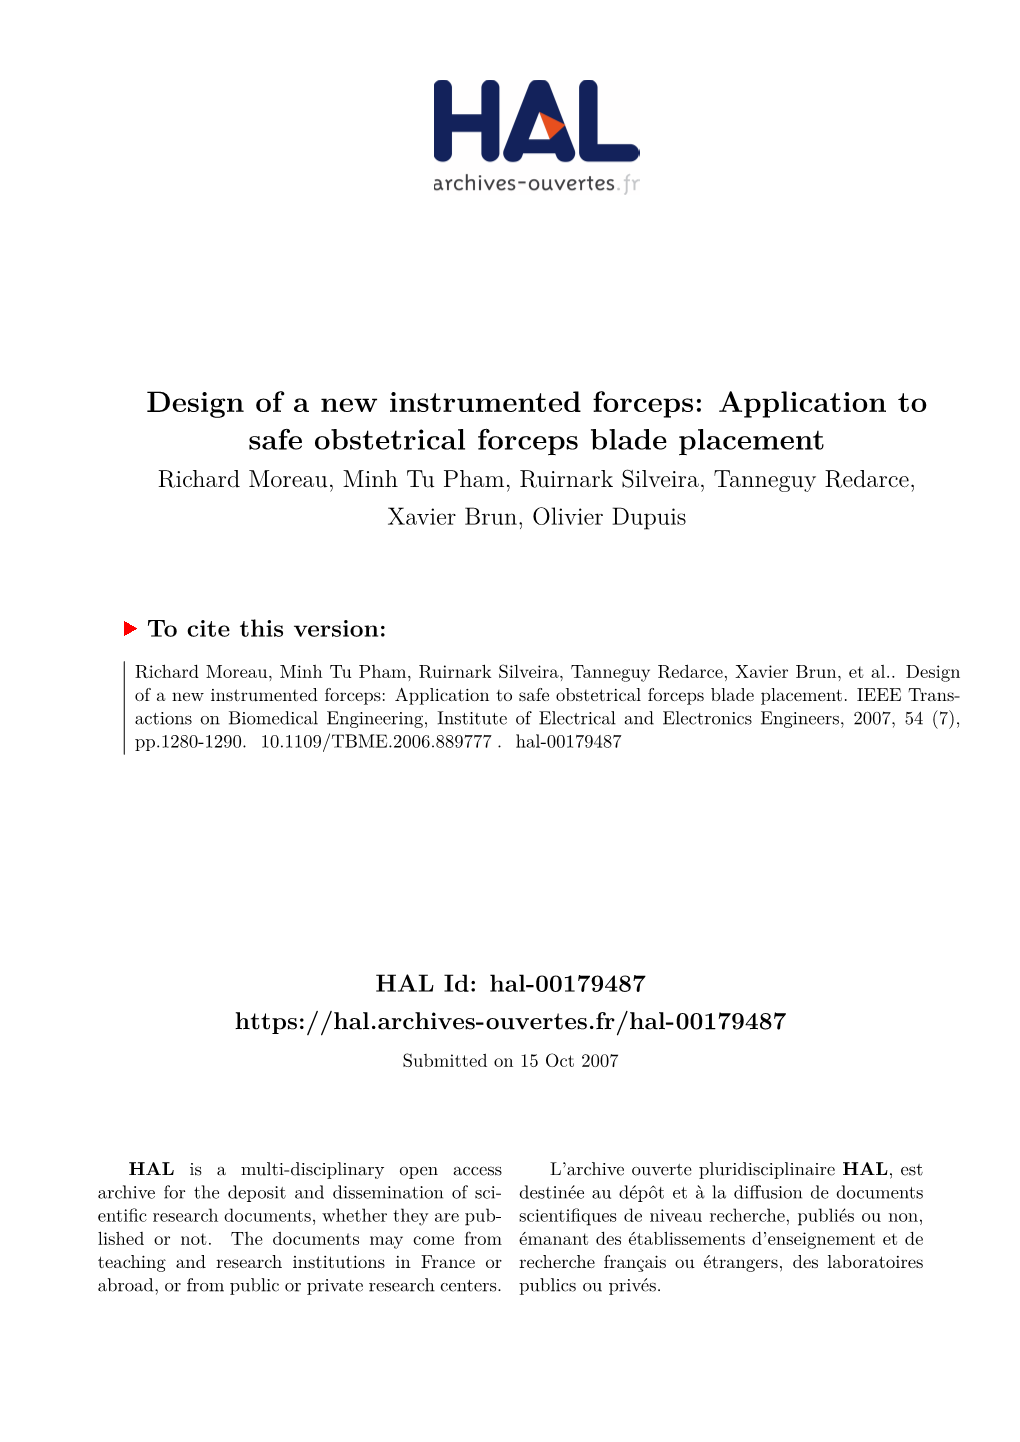 Design of a New Instrumented Forceps